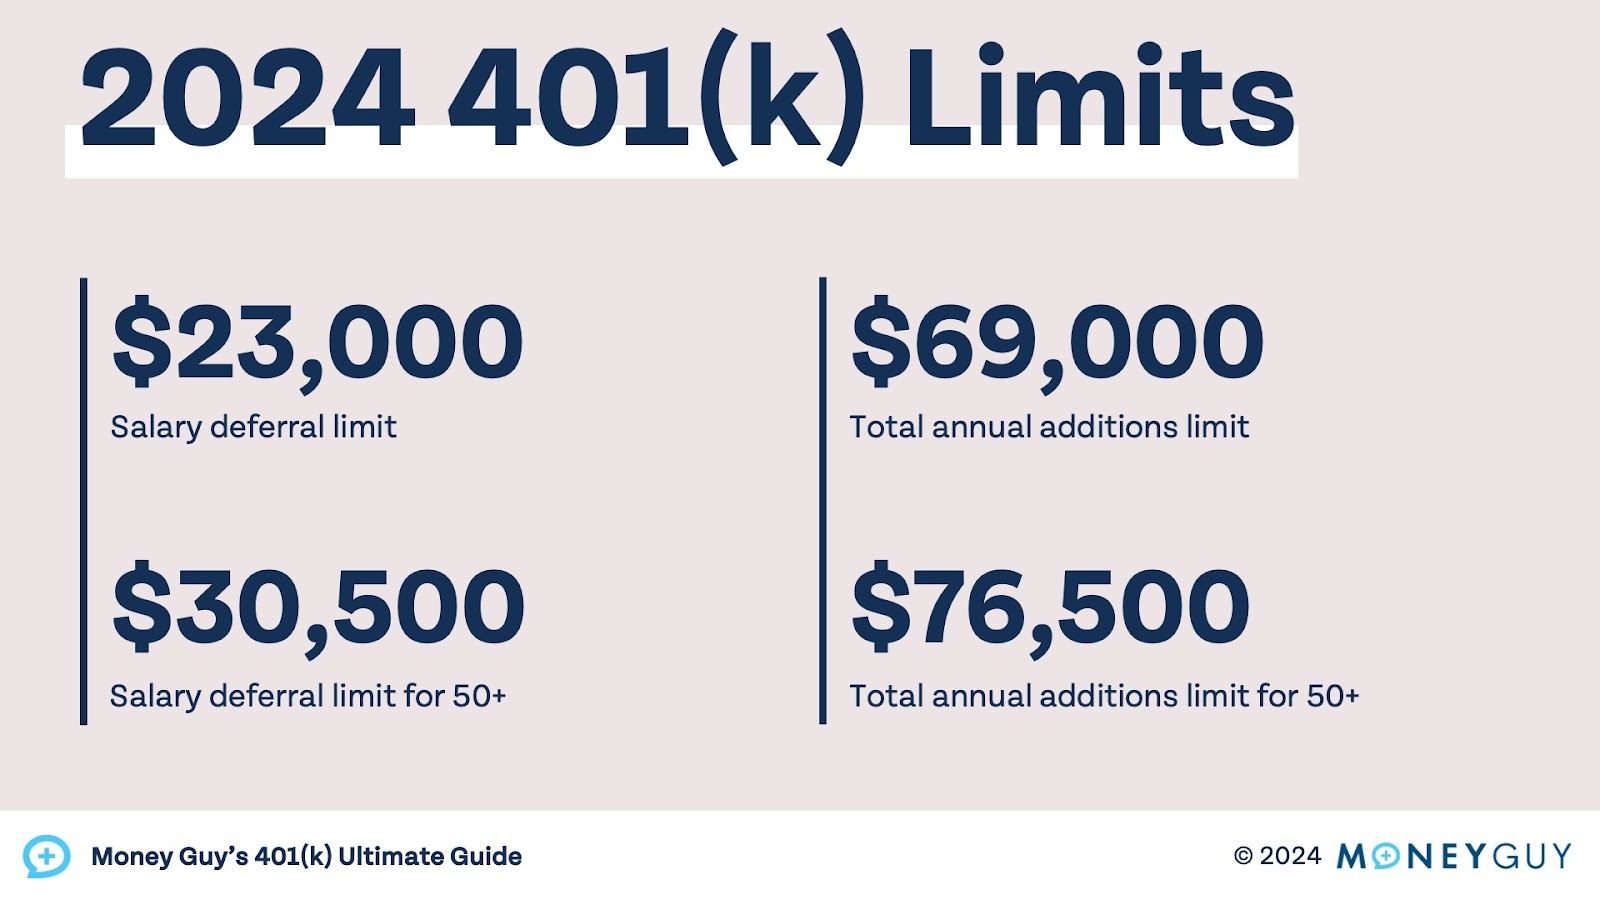 This image shows the 2024 401(k) contribution limits.